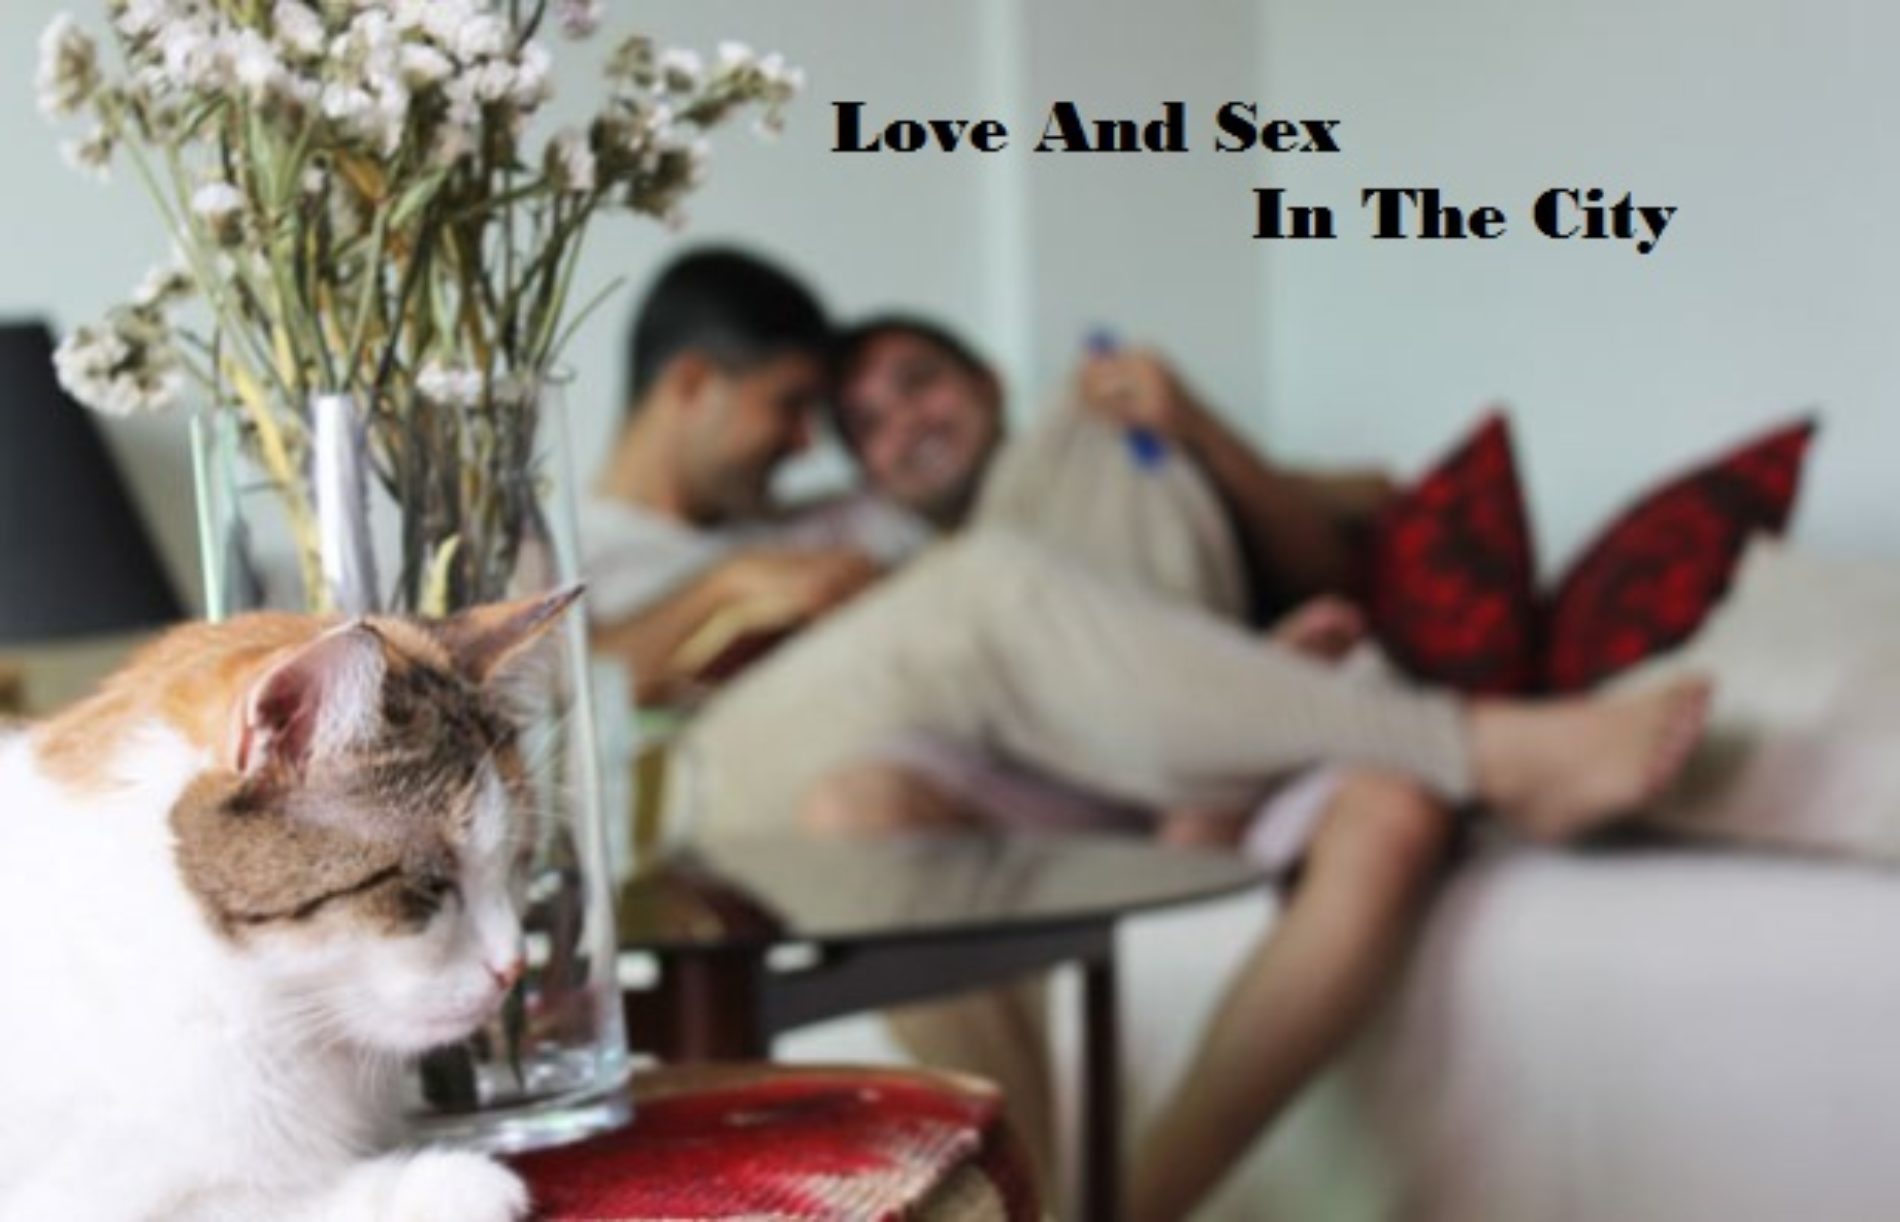 LOVE AND SEX IN THE CITY (Episode 54)